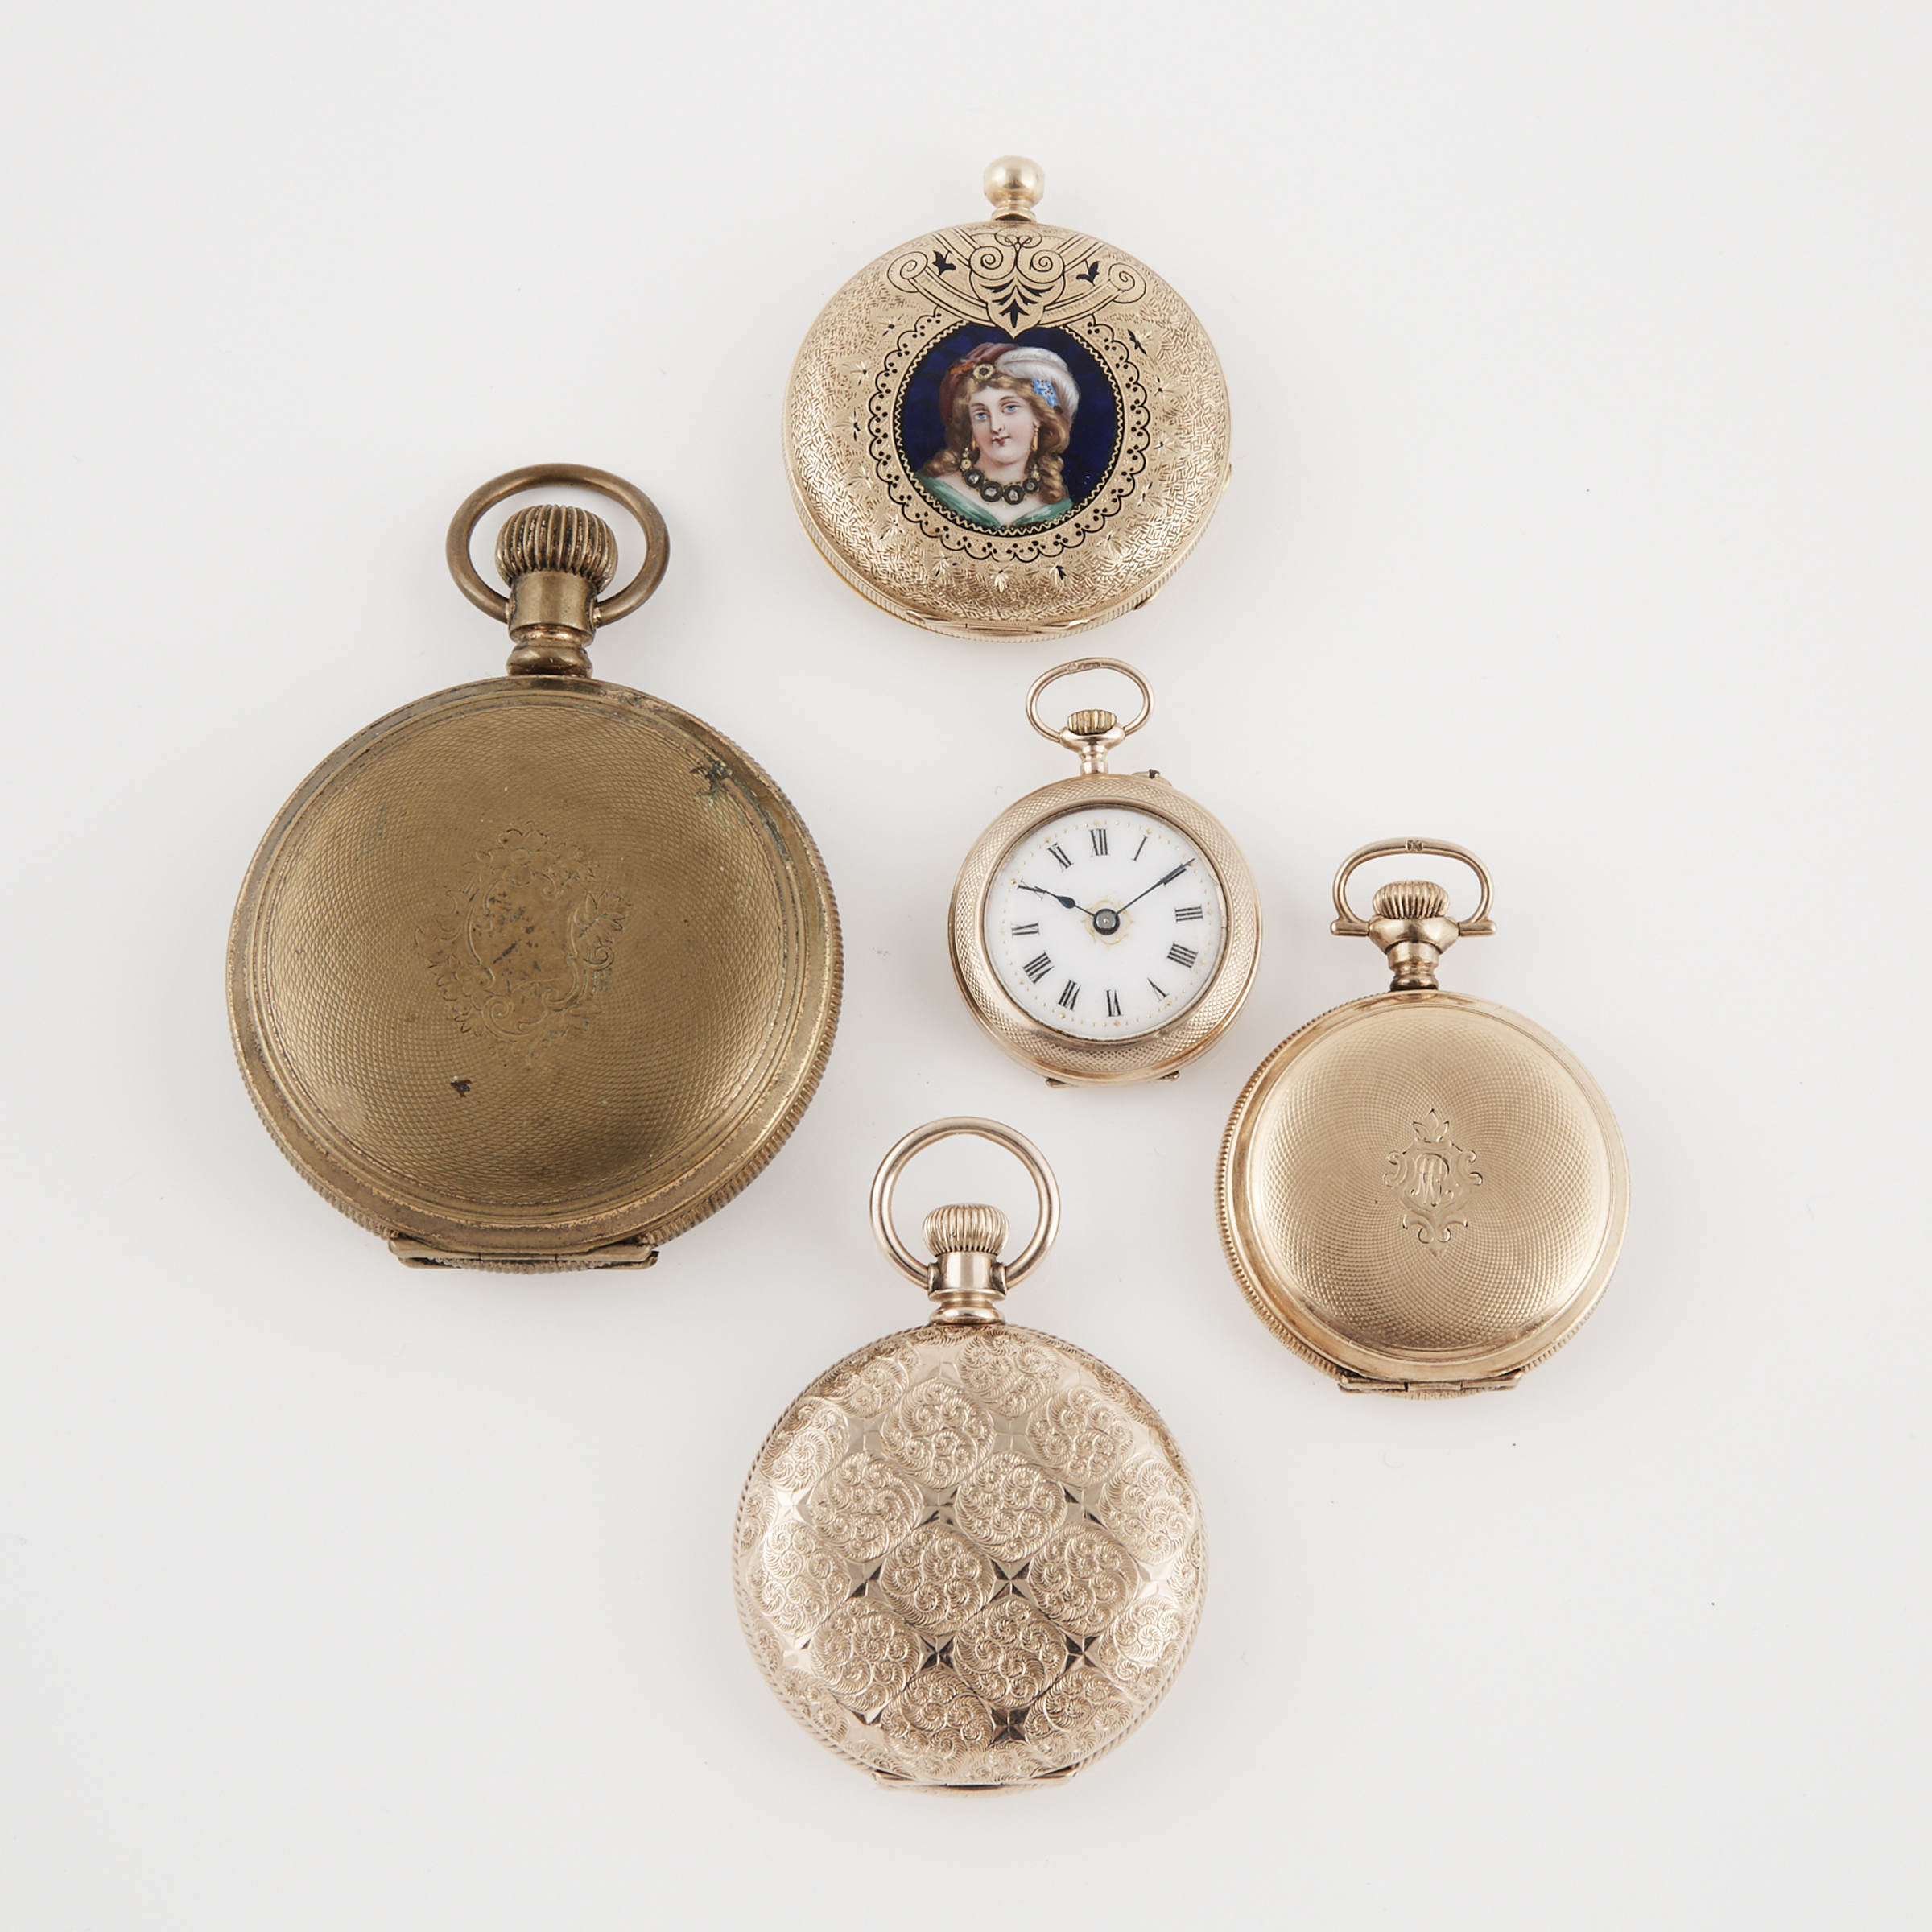 5 Pocket Watches And 2 Wristwatches